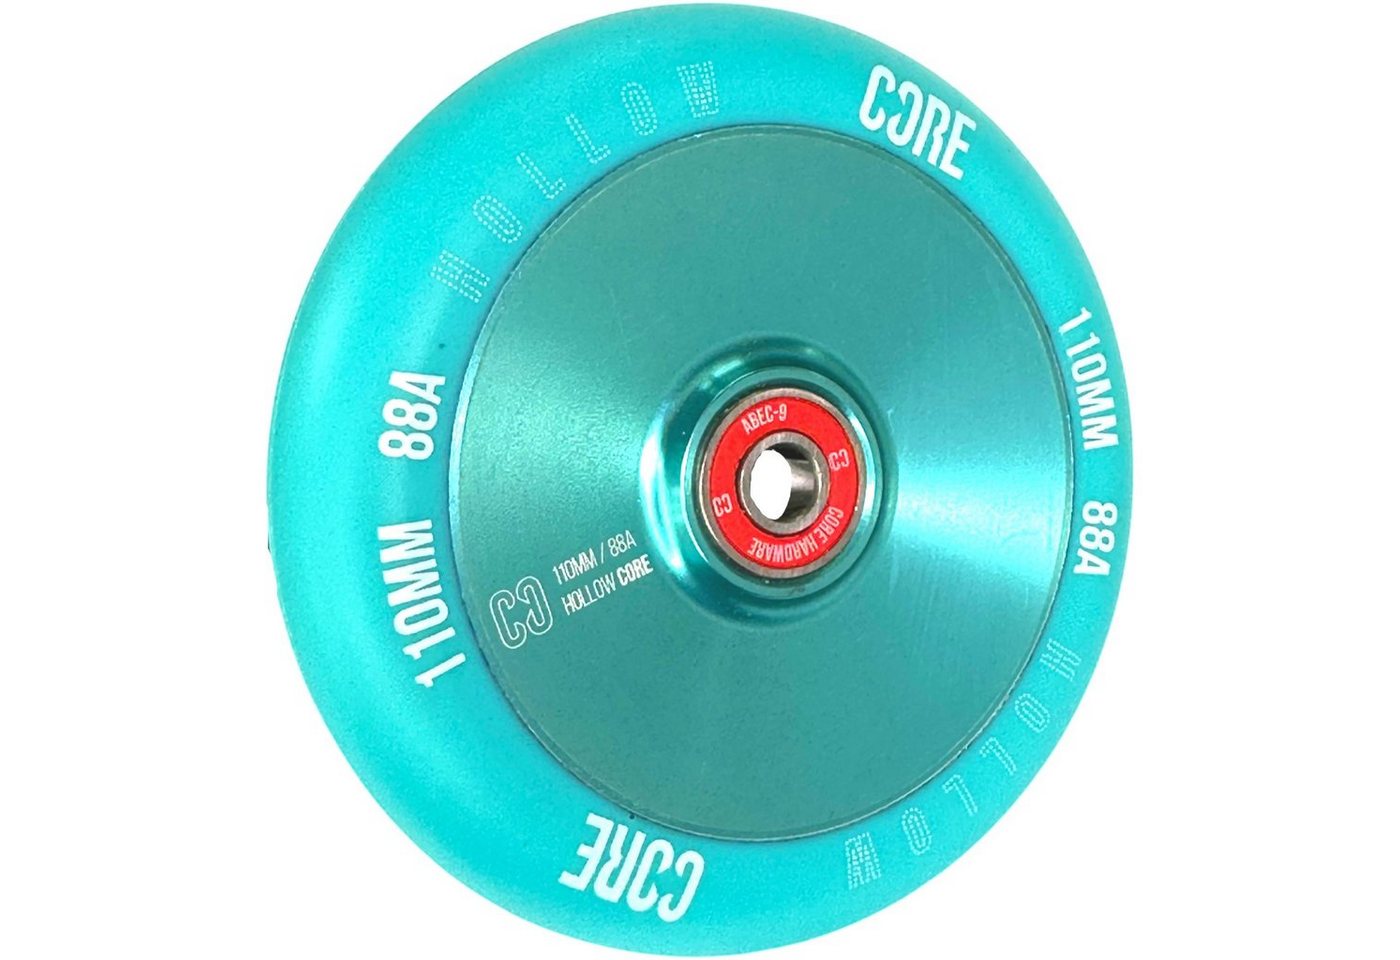 Core Action Sports Stuntscooter Core Hollow V2 Stunt-Scooter Rolle 110mm Mint von Core Action Sports